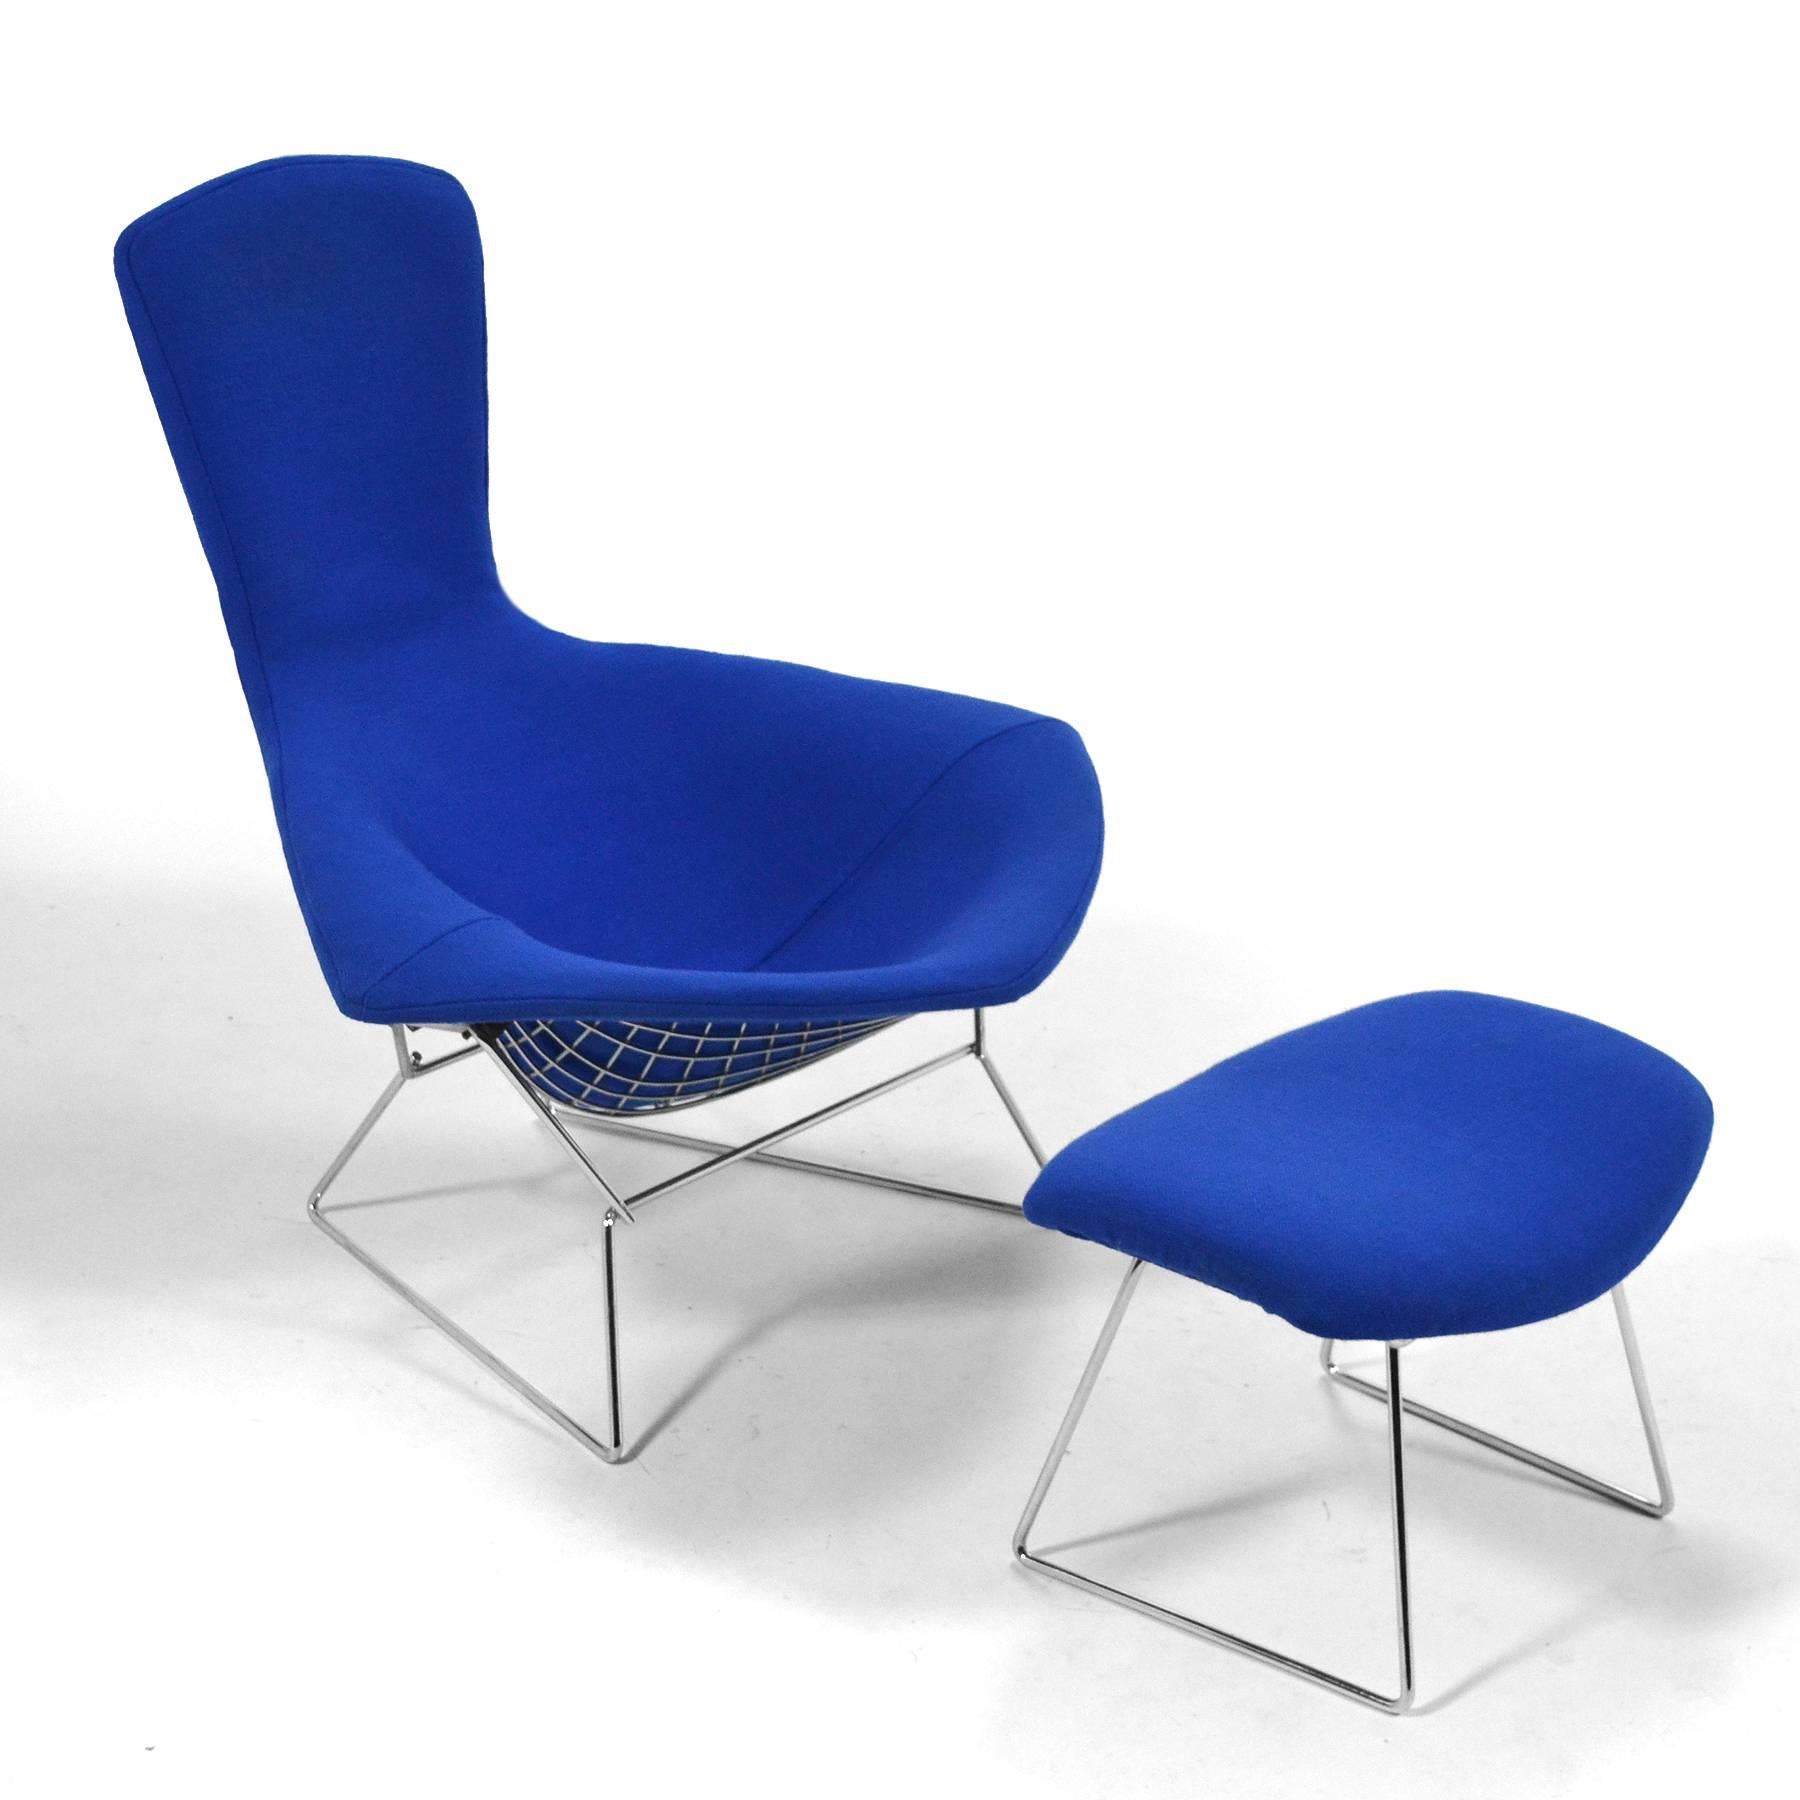 This early bird chair and ottoman by Harry Bertoia for Knoll has a frame of chromed steel and a vivid blue cover. The fame is the cleanest we've ever seen and the fabric is in great original condition. We have had the original cover cleaned and